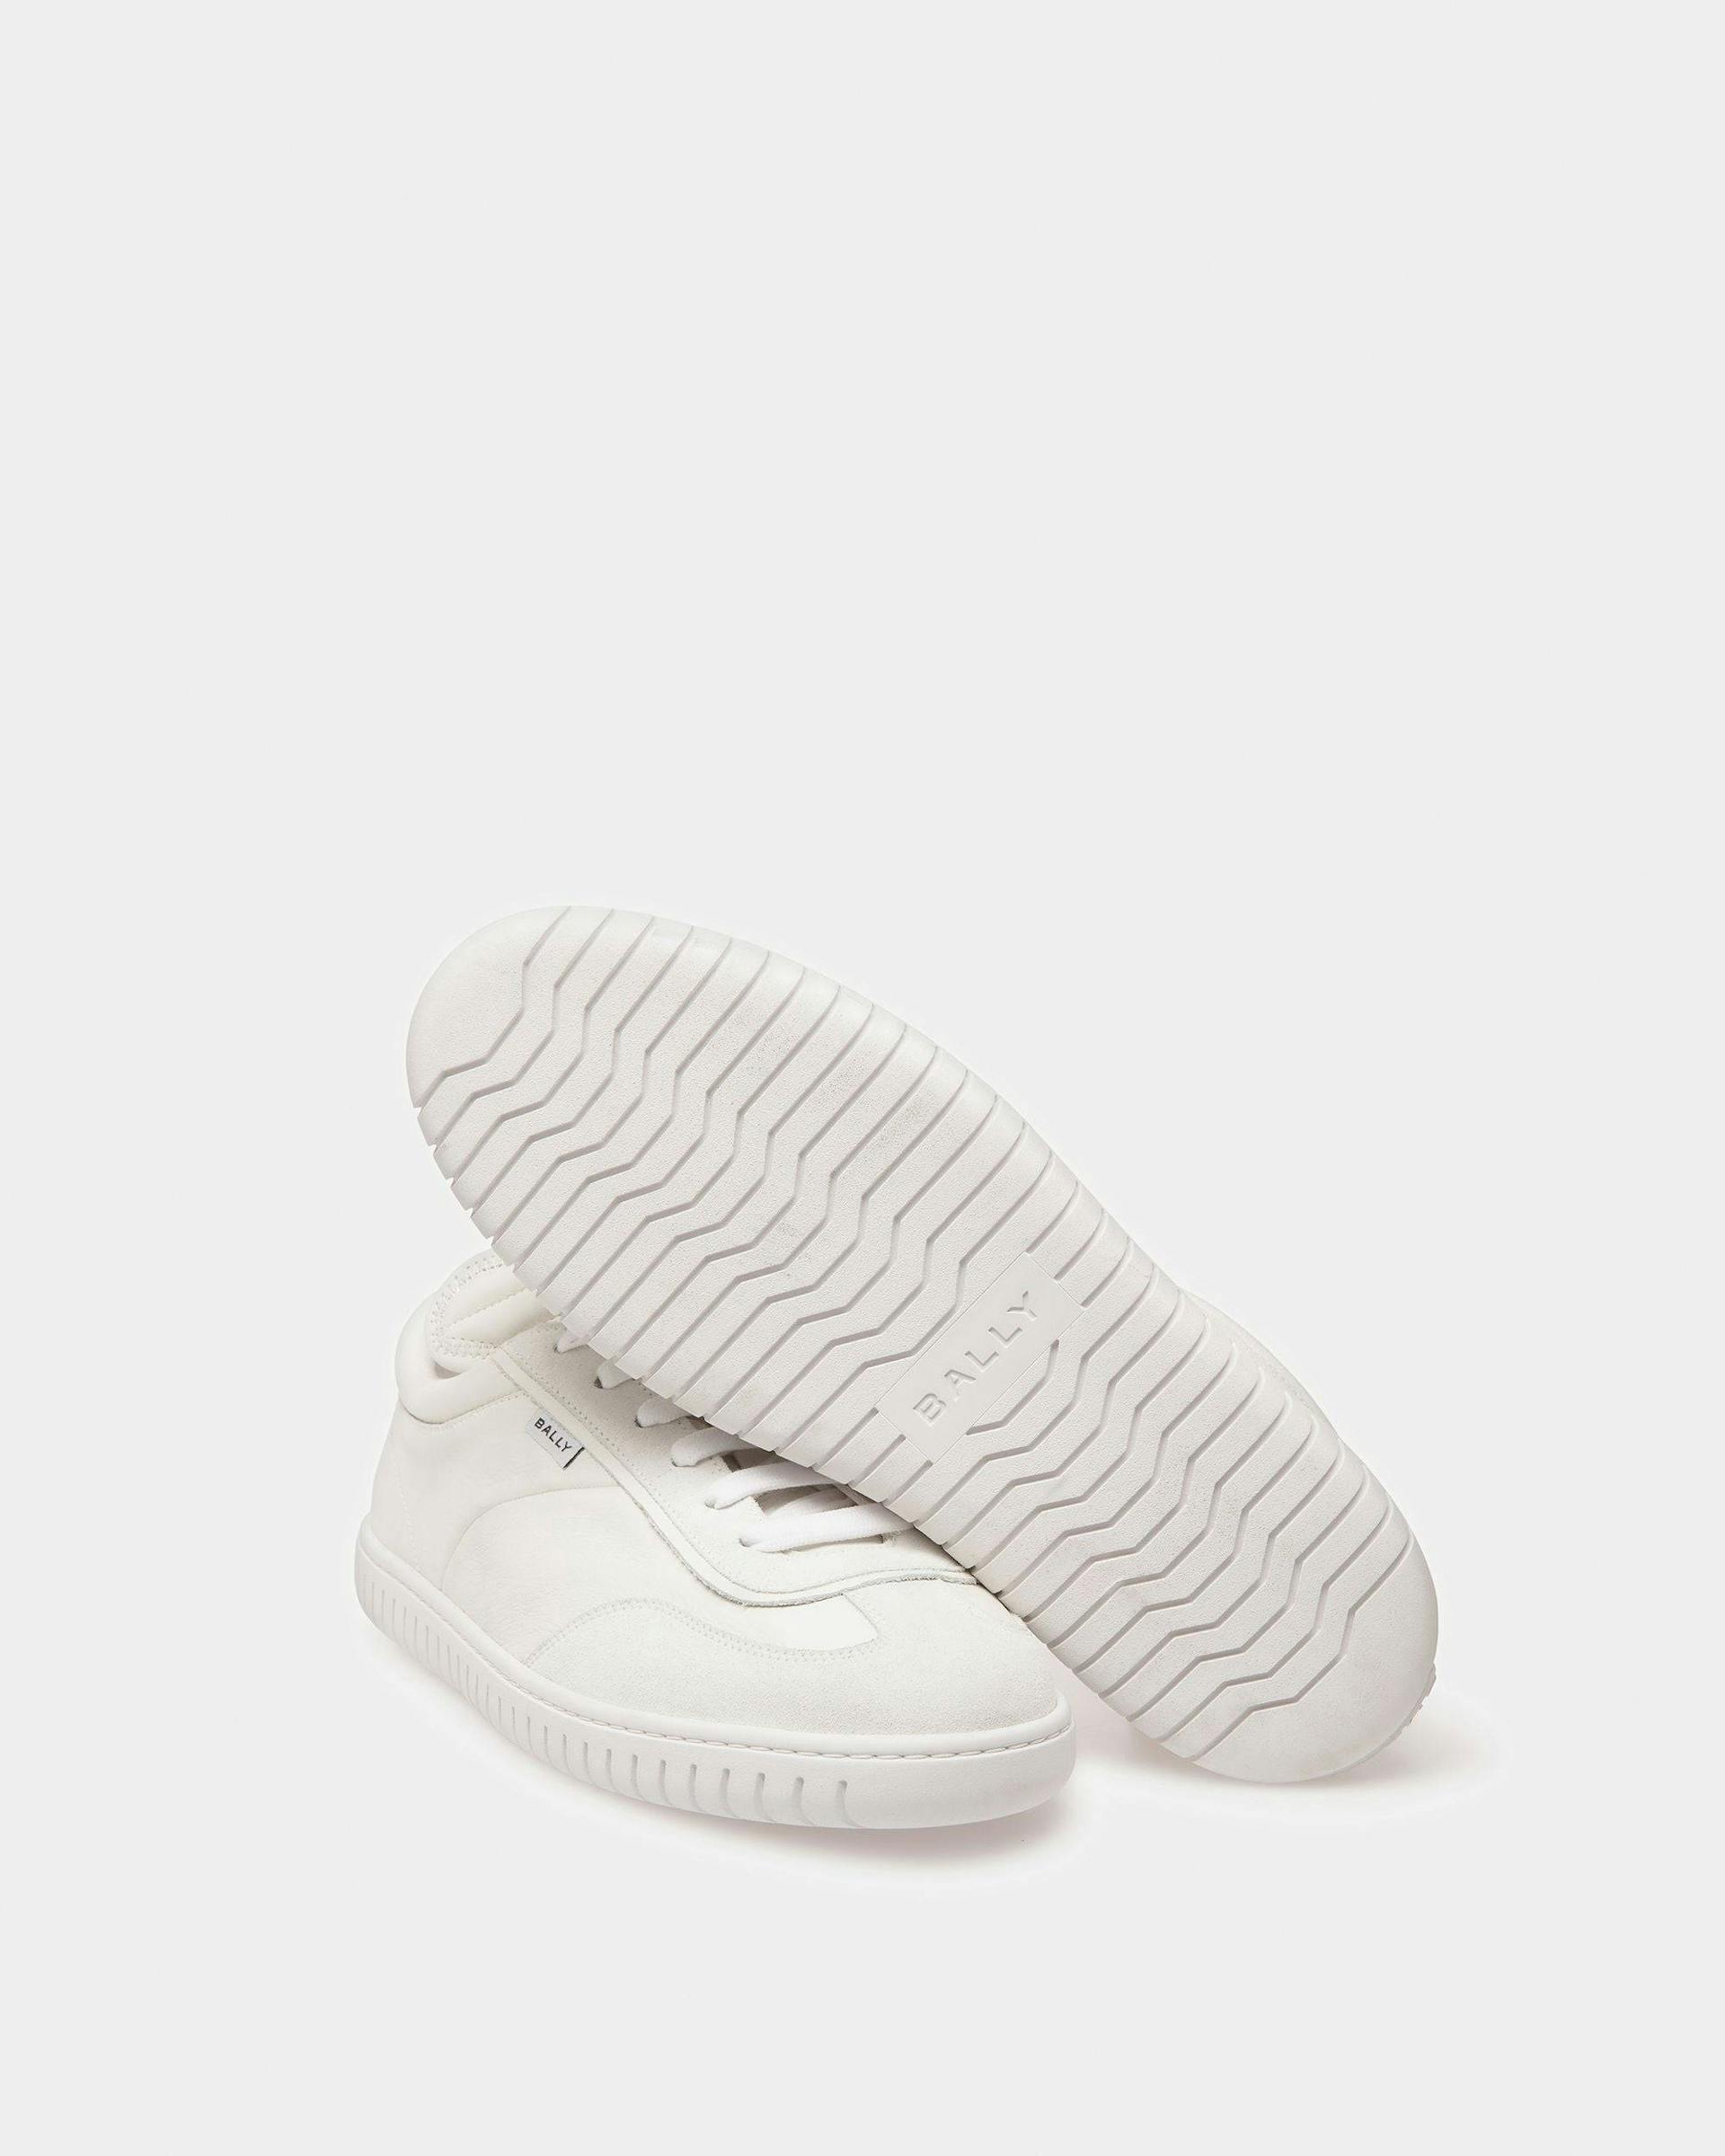 Men's Player Sneakers In White Leather | Bally | Still Life Below